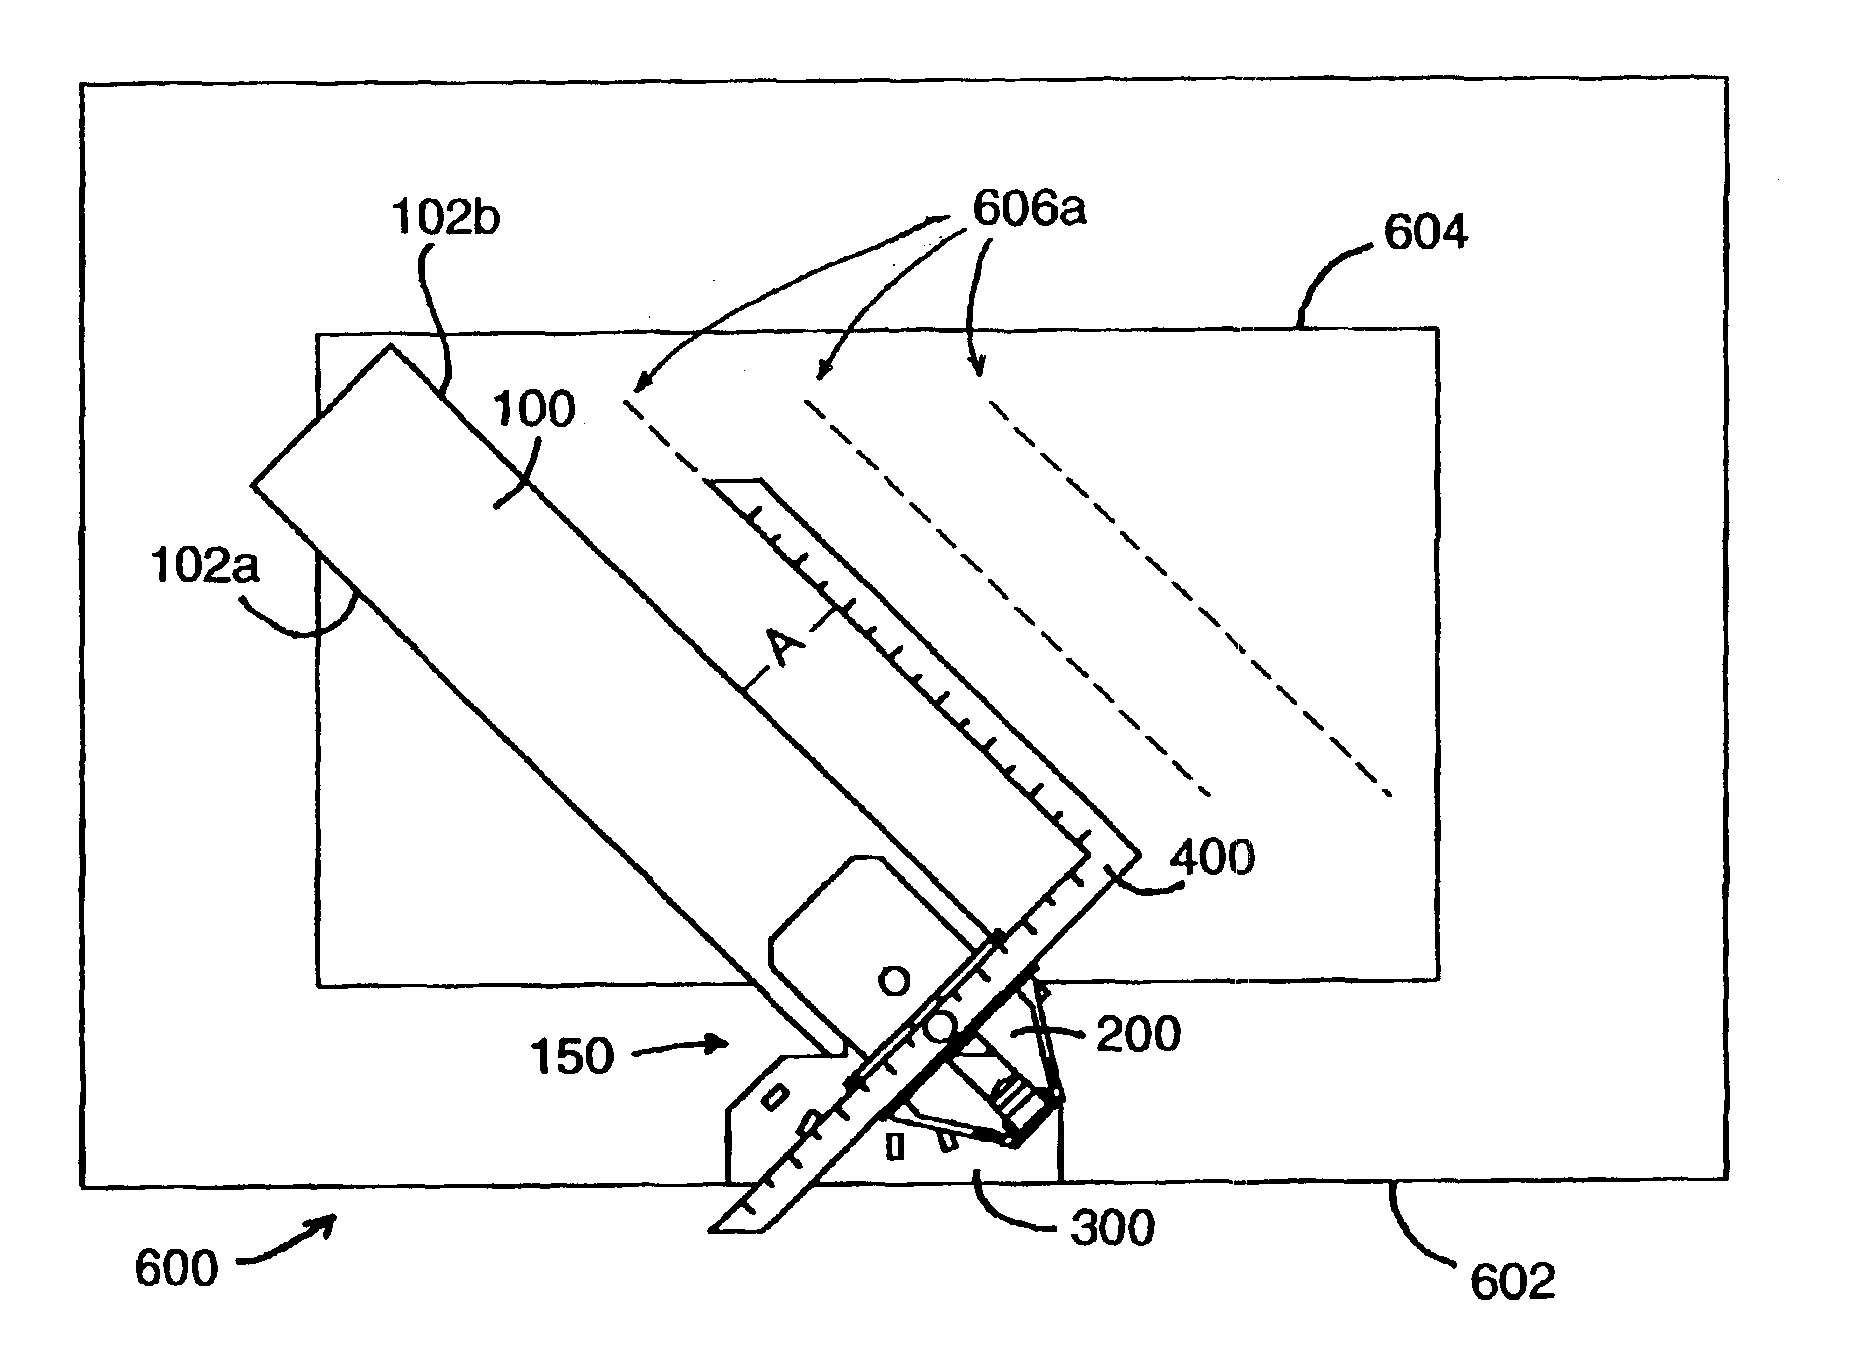 Apparatus and methods for measuring the movement of a straightedge to draw lines or cut strips of a flat material